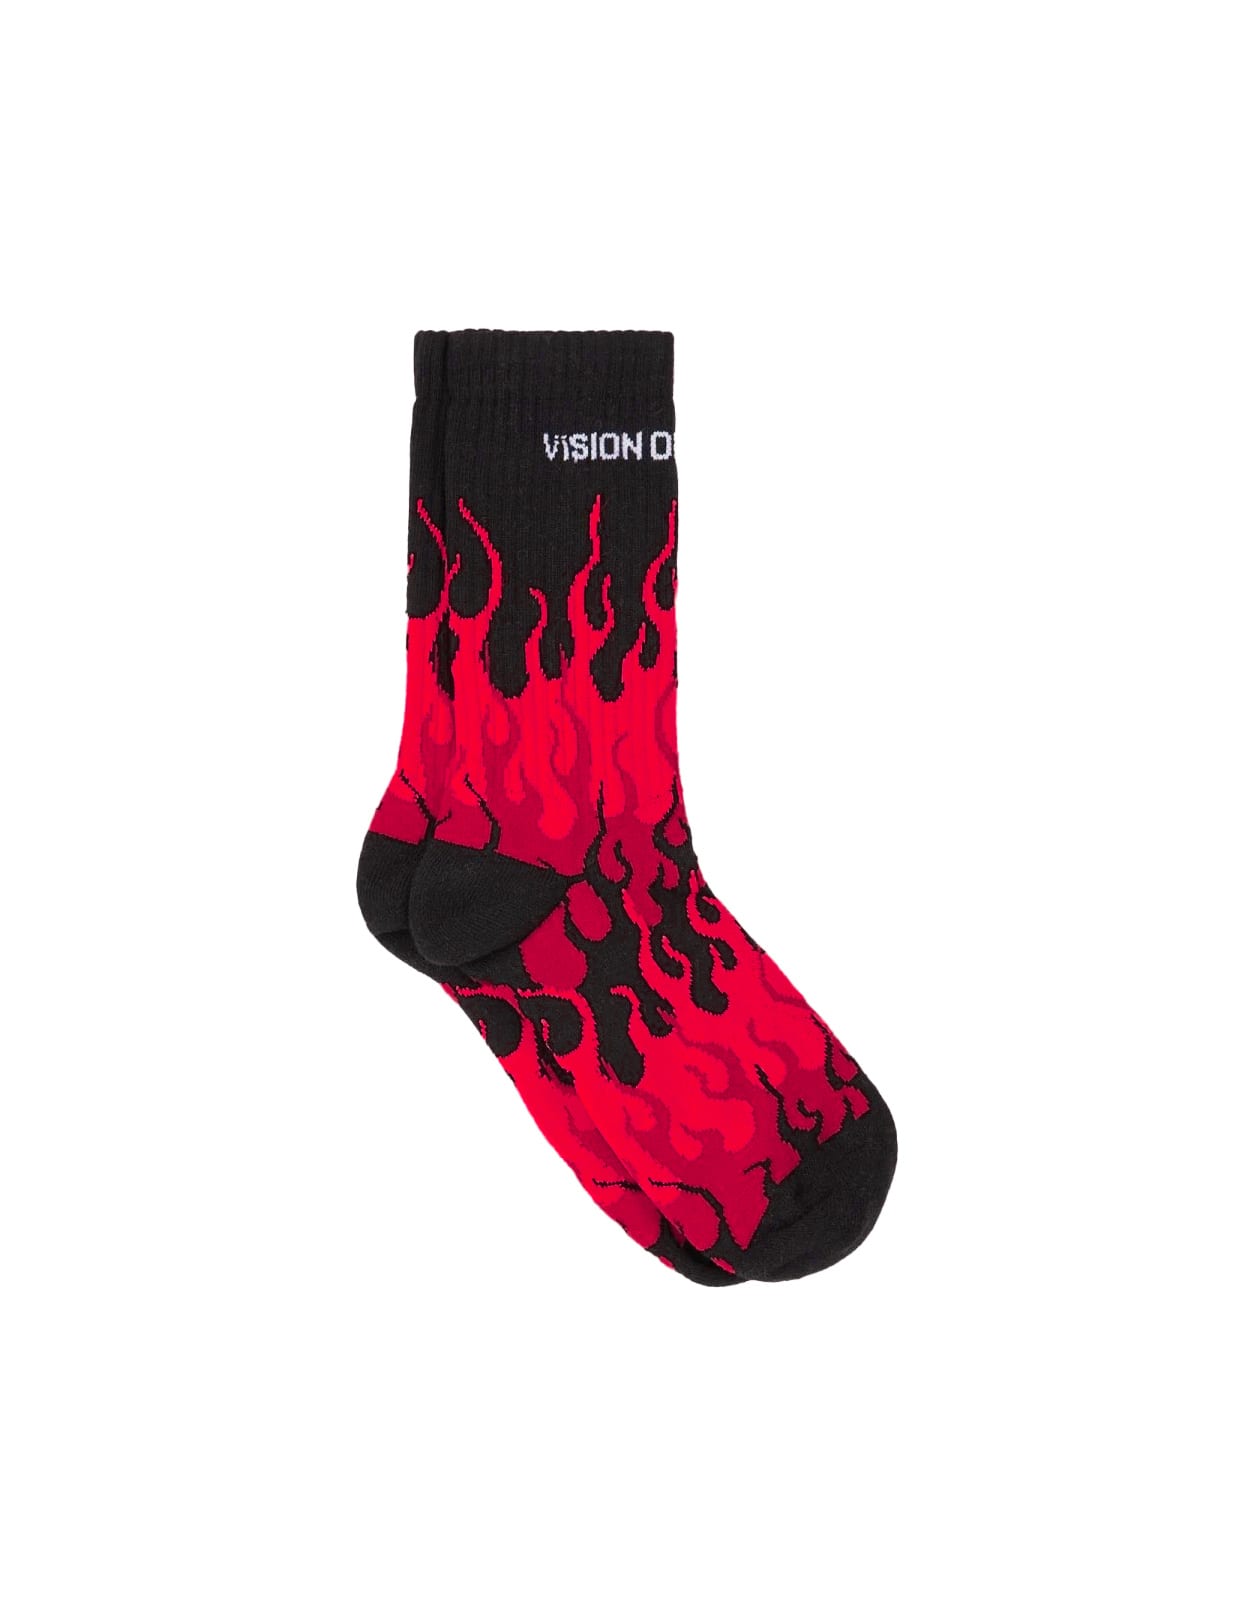 Black Socks With Triple Red Flame